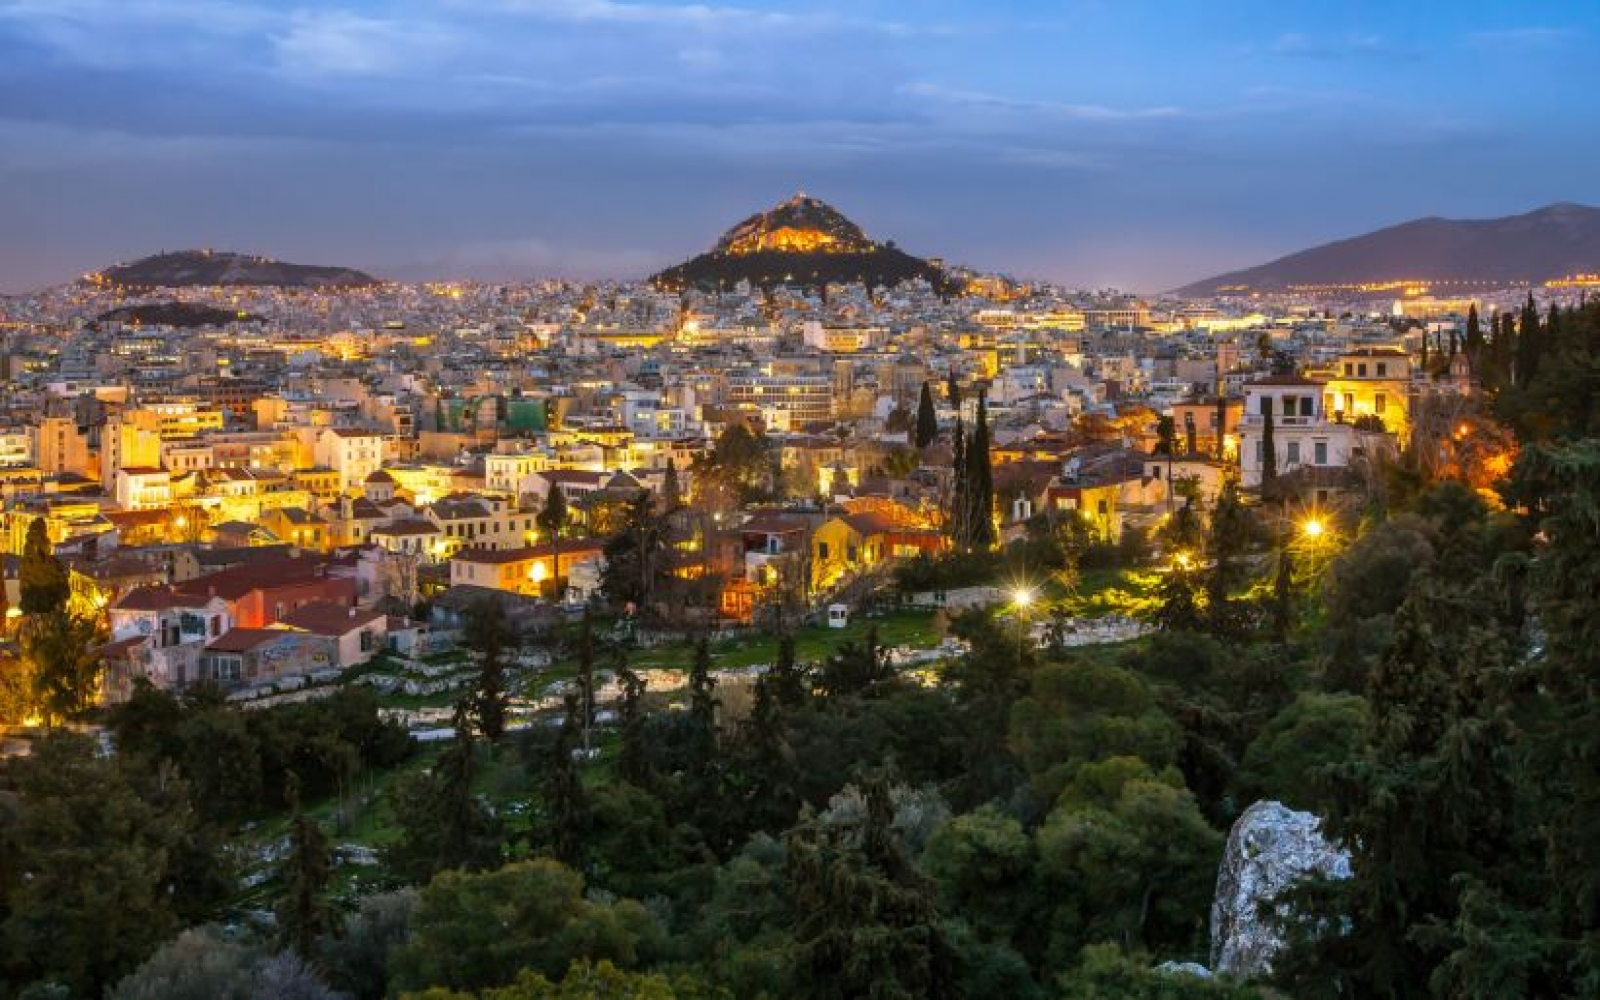 Suggestions for a different view of Athens